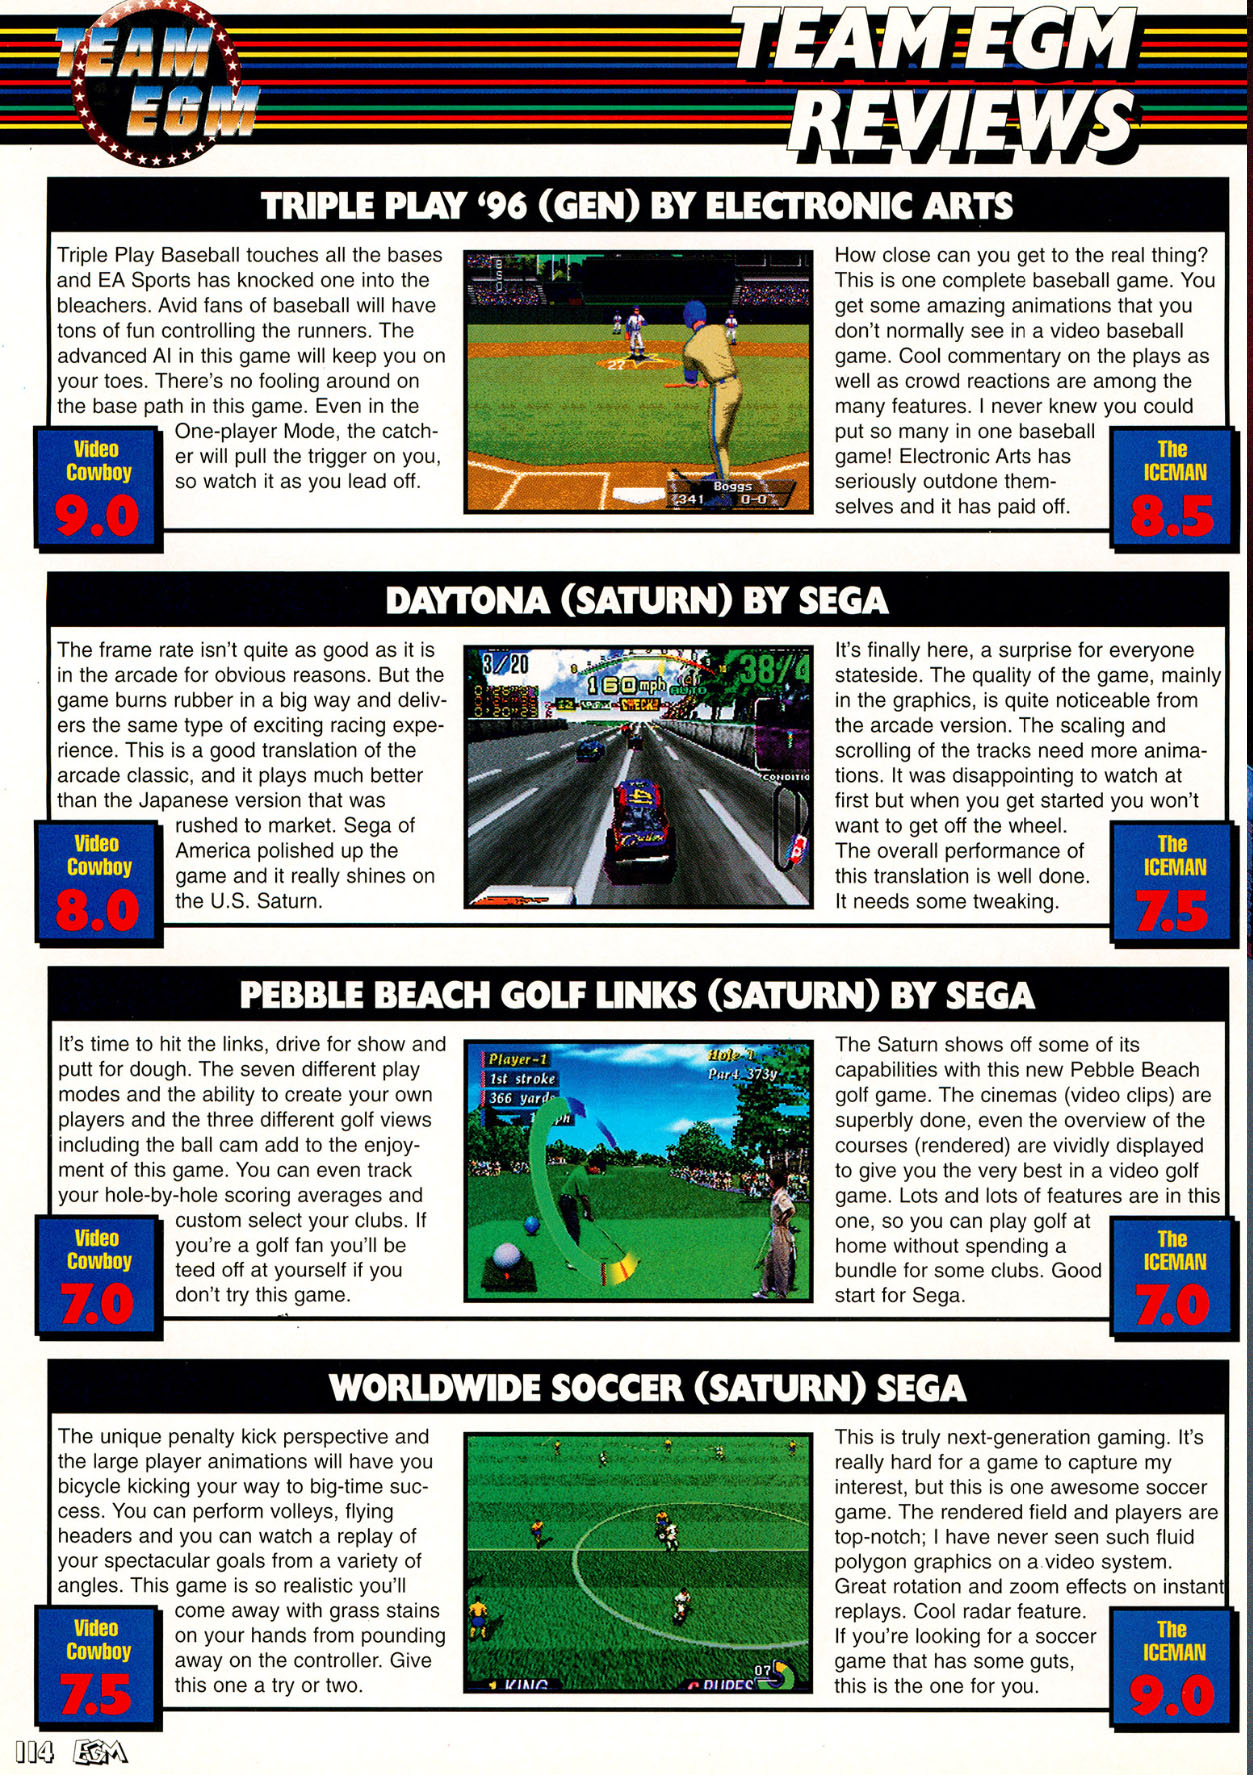 Triple Play '96 Review, Electronic Gaming Monthly July 1995 page 114